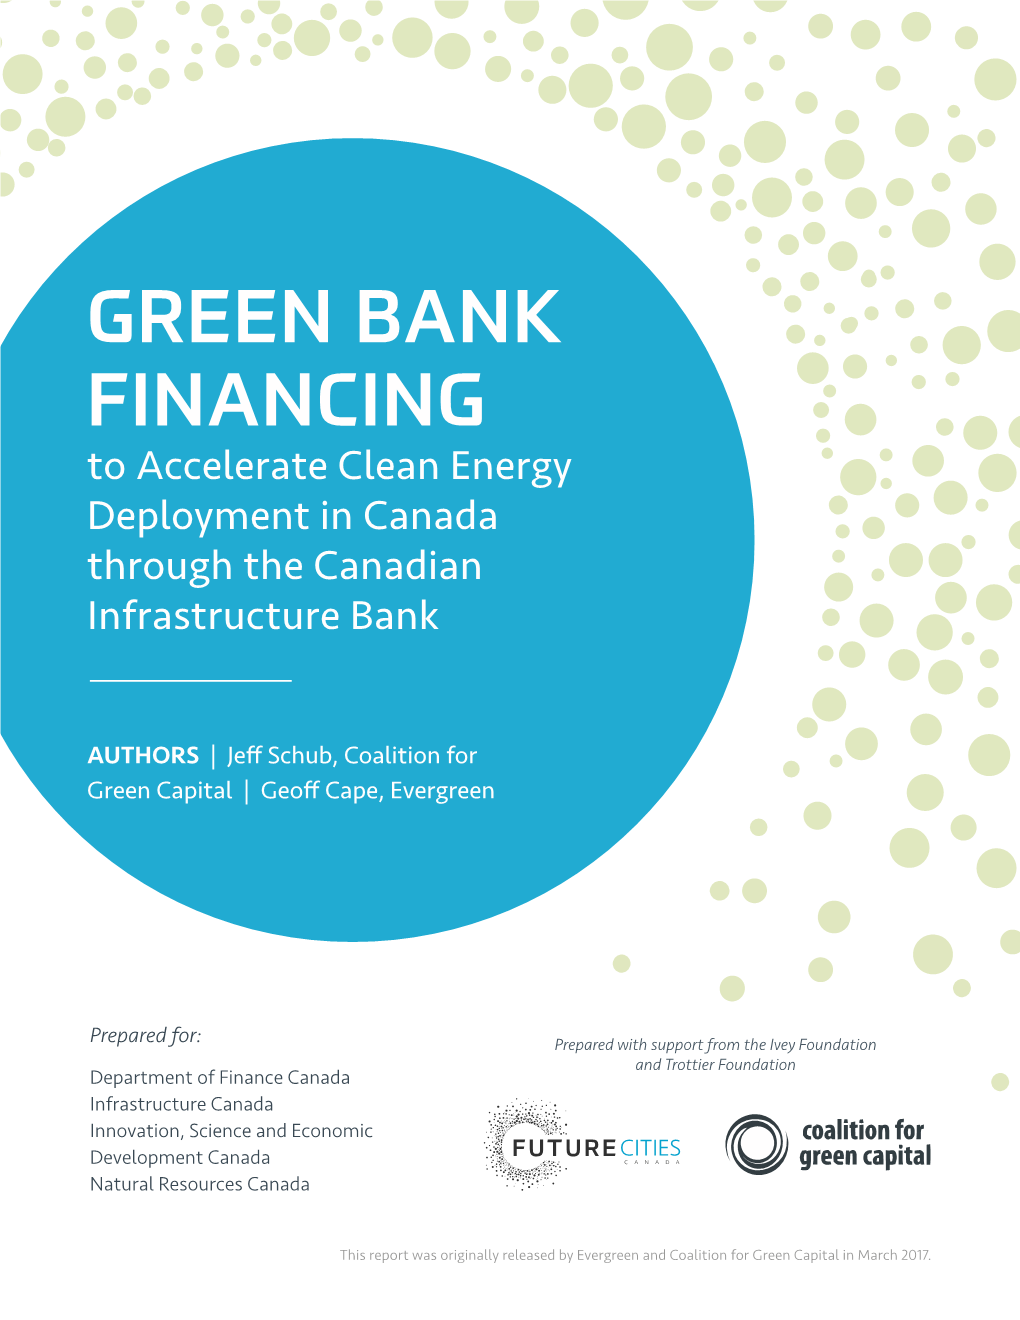 GREEN BANK FINANCING to Accelerate Clean Energy Deployment in Canada Through the Canadian Infrastructure Bank